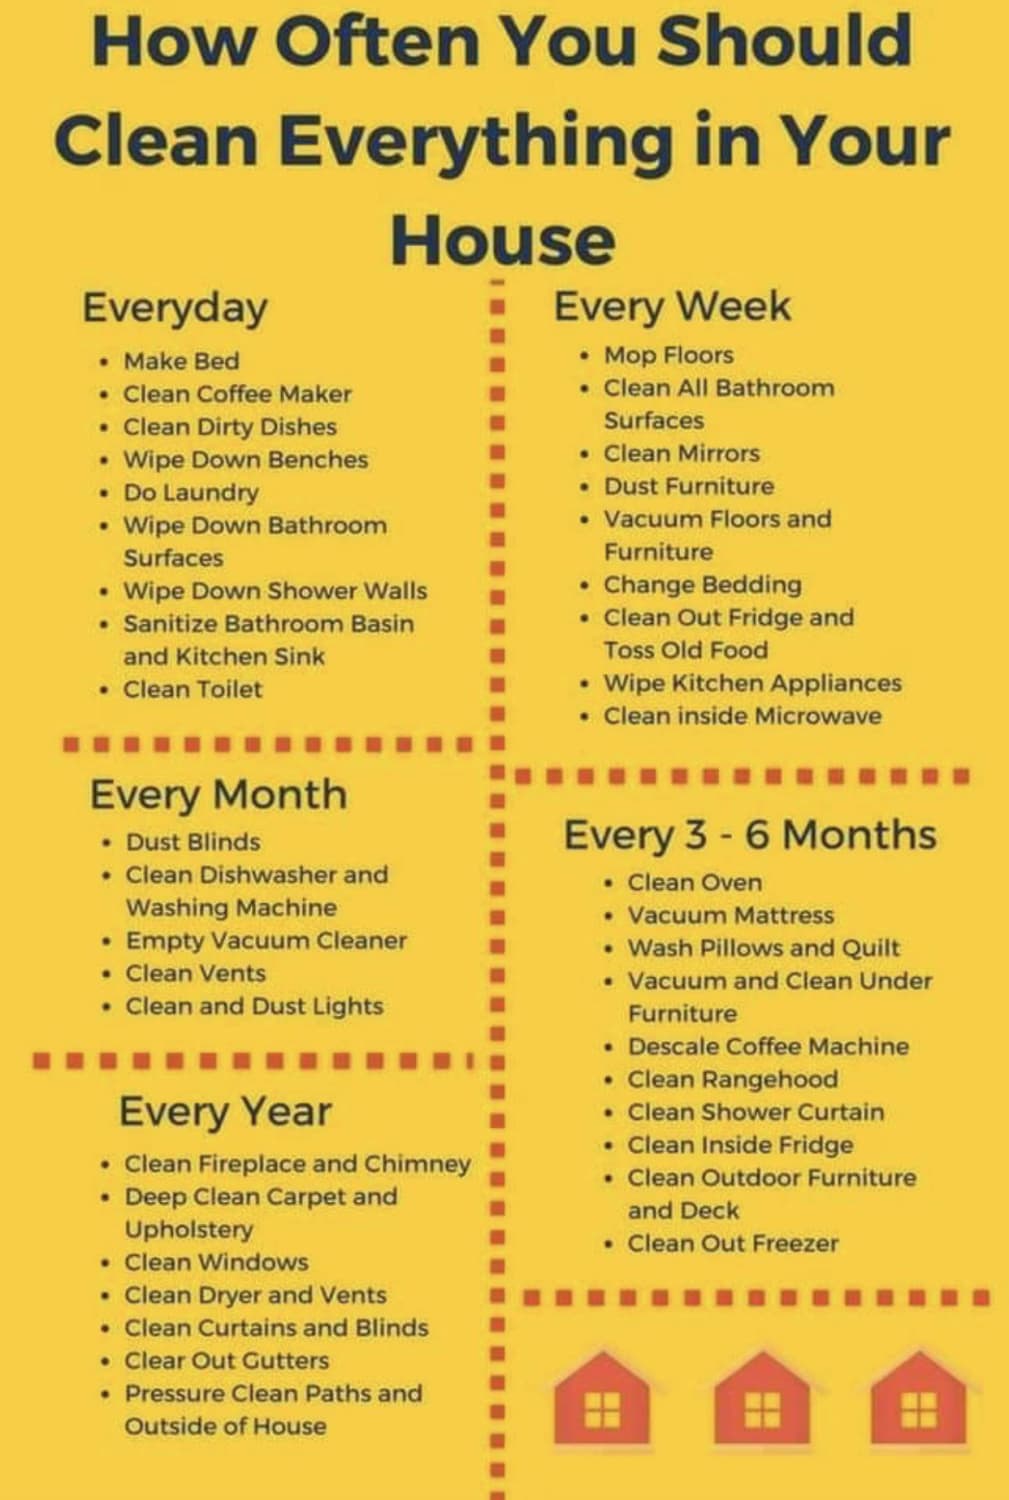 Guide to how often you should clean items in your home